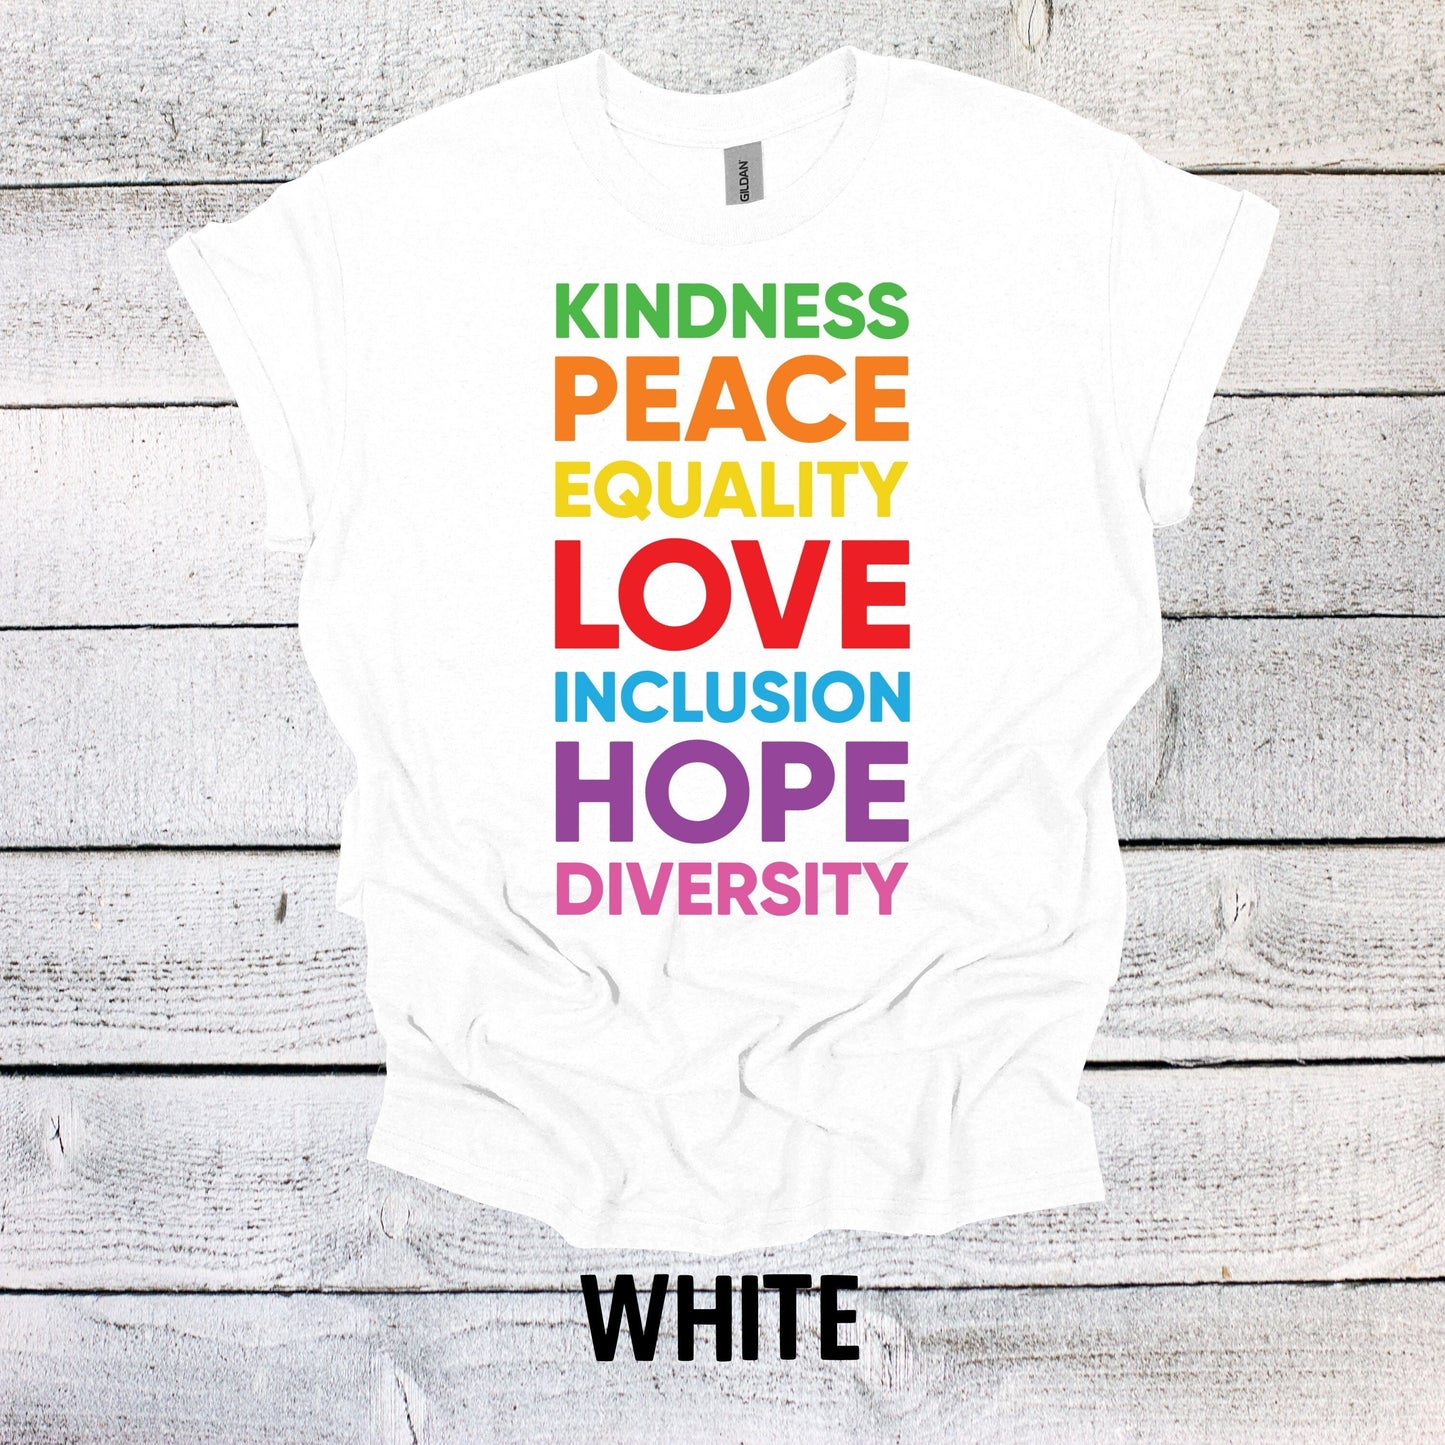 Kindness Peace Equality Rainbow Pride Shirt - LGBTQ Tee for All Genders - Pride Month Apparel